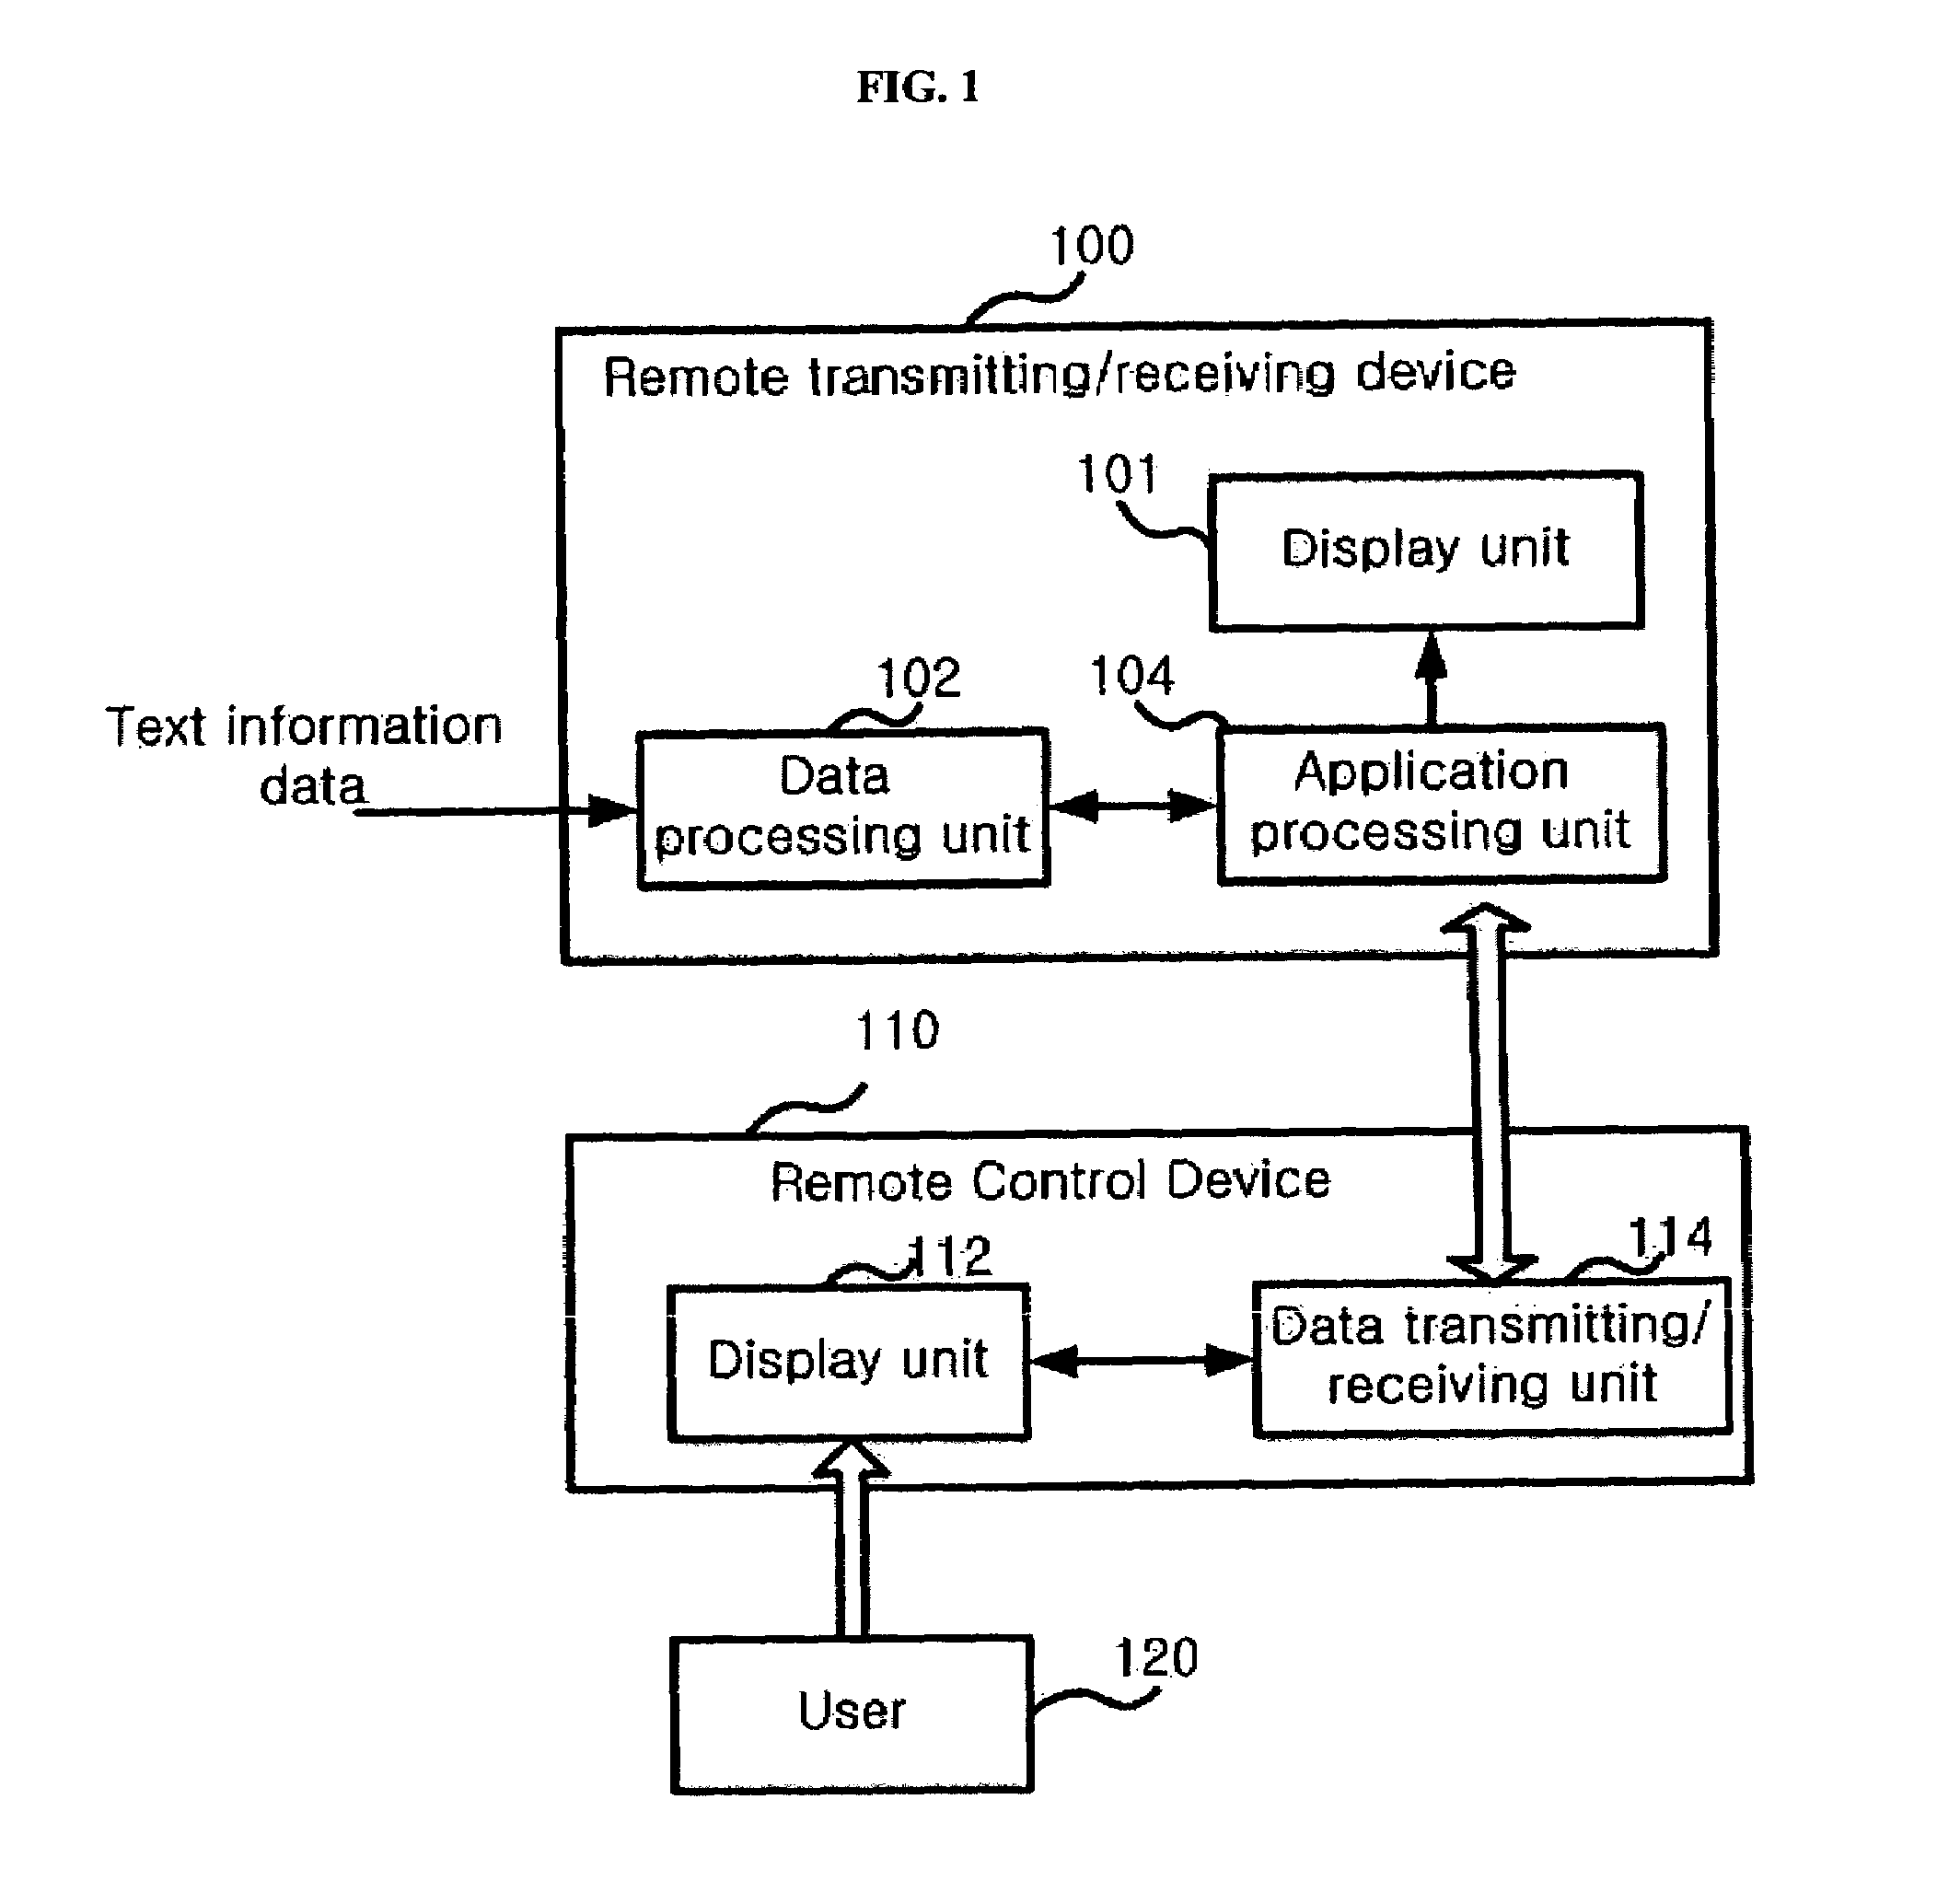 Remote control device and method using structured data format